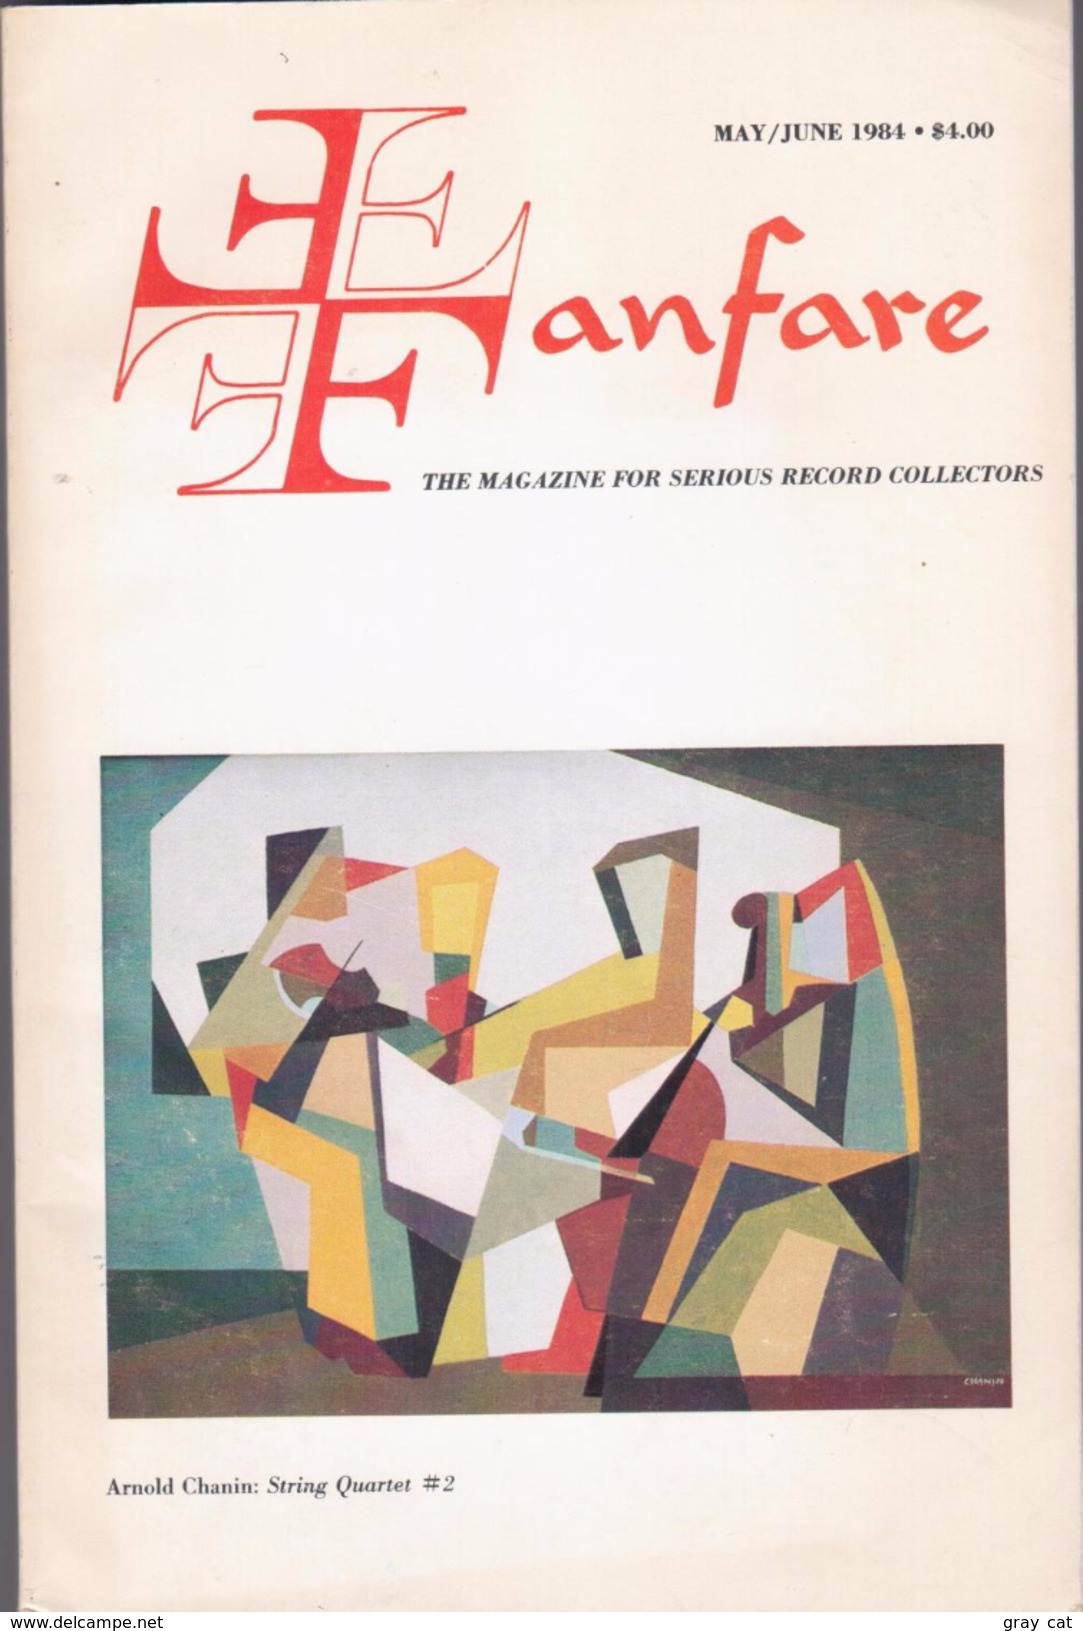 Fanfare, The Magazine For Serious Record Collectors, Vol. 7, No. 5, May/June 1984 - Entertainment